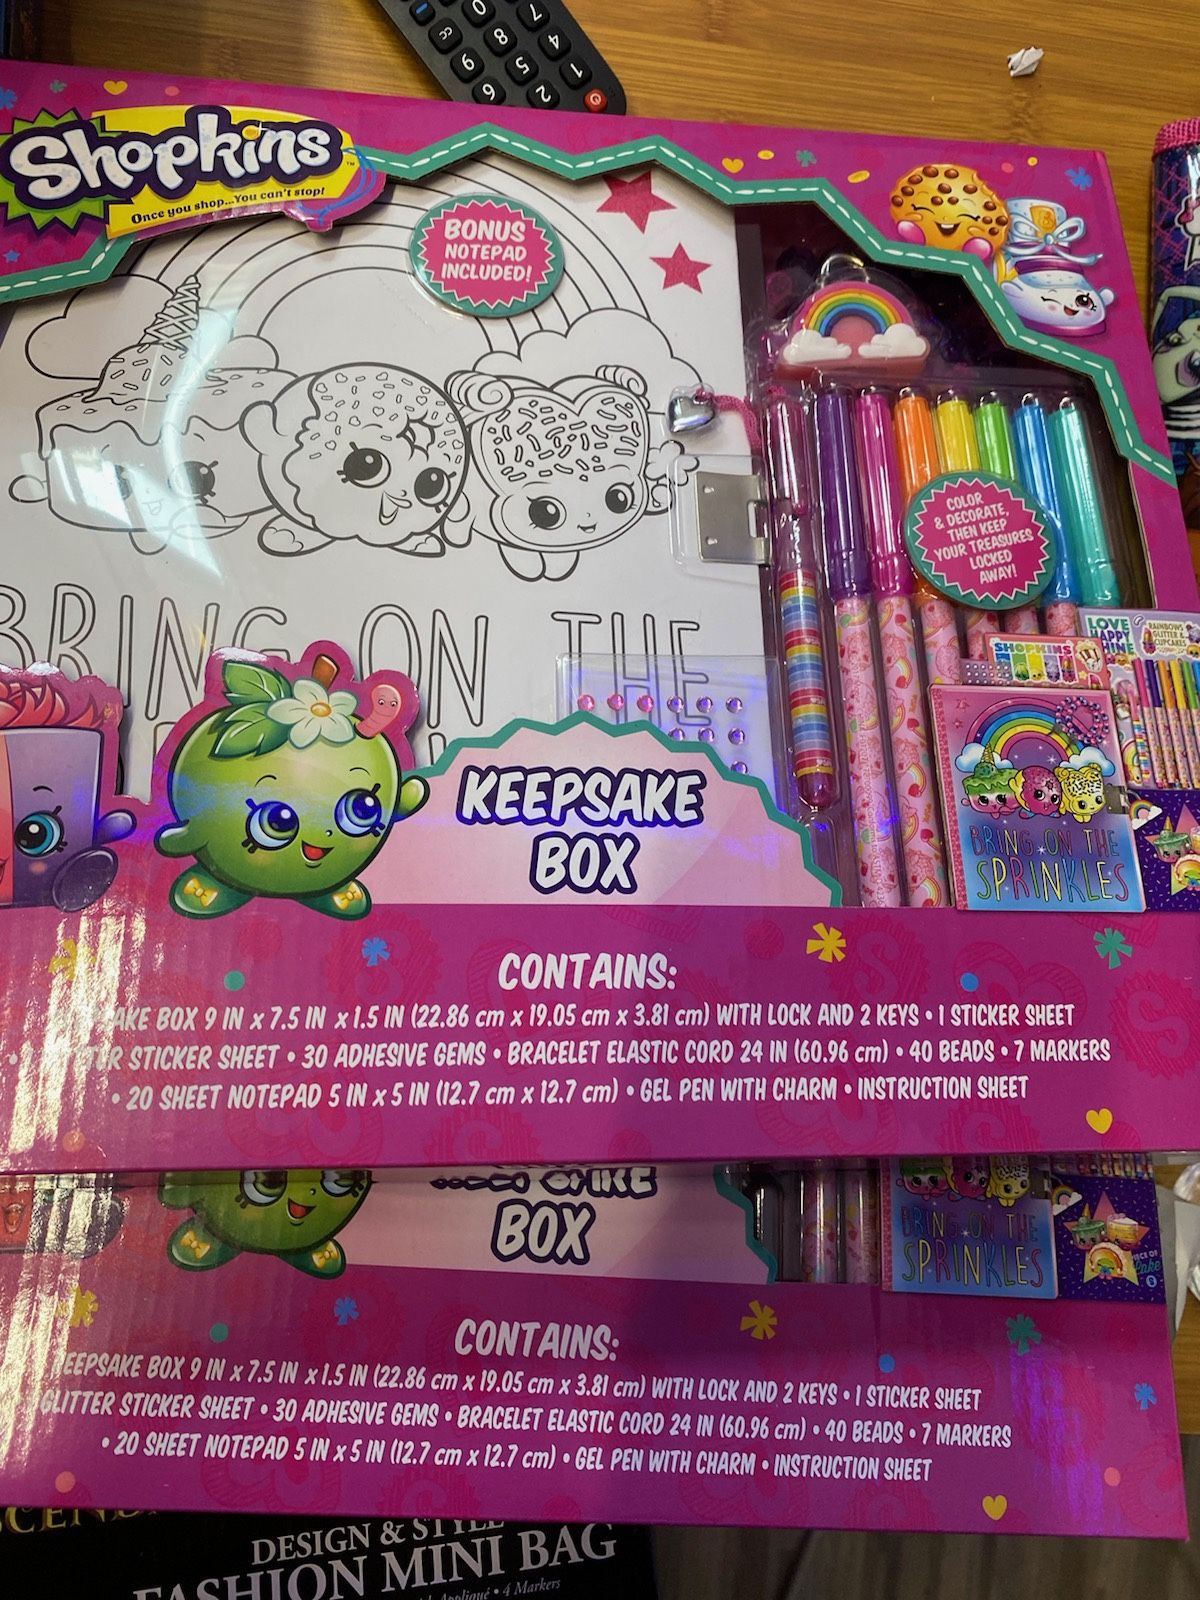 Shopkins and hatchimals stationary set great for Christmas gifts